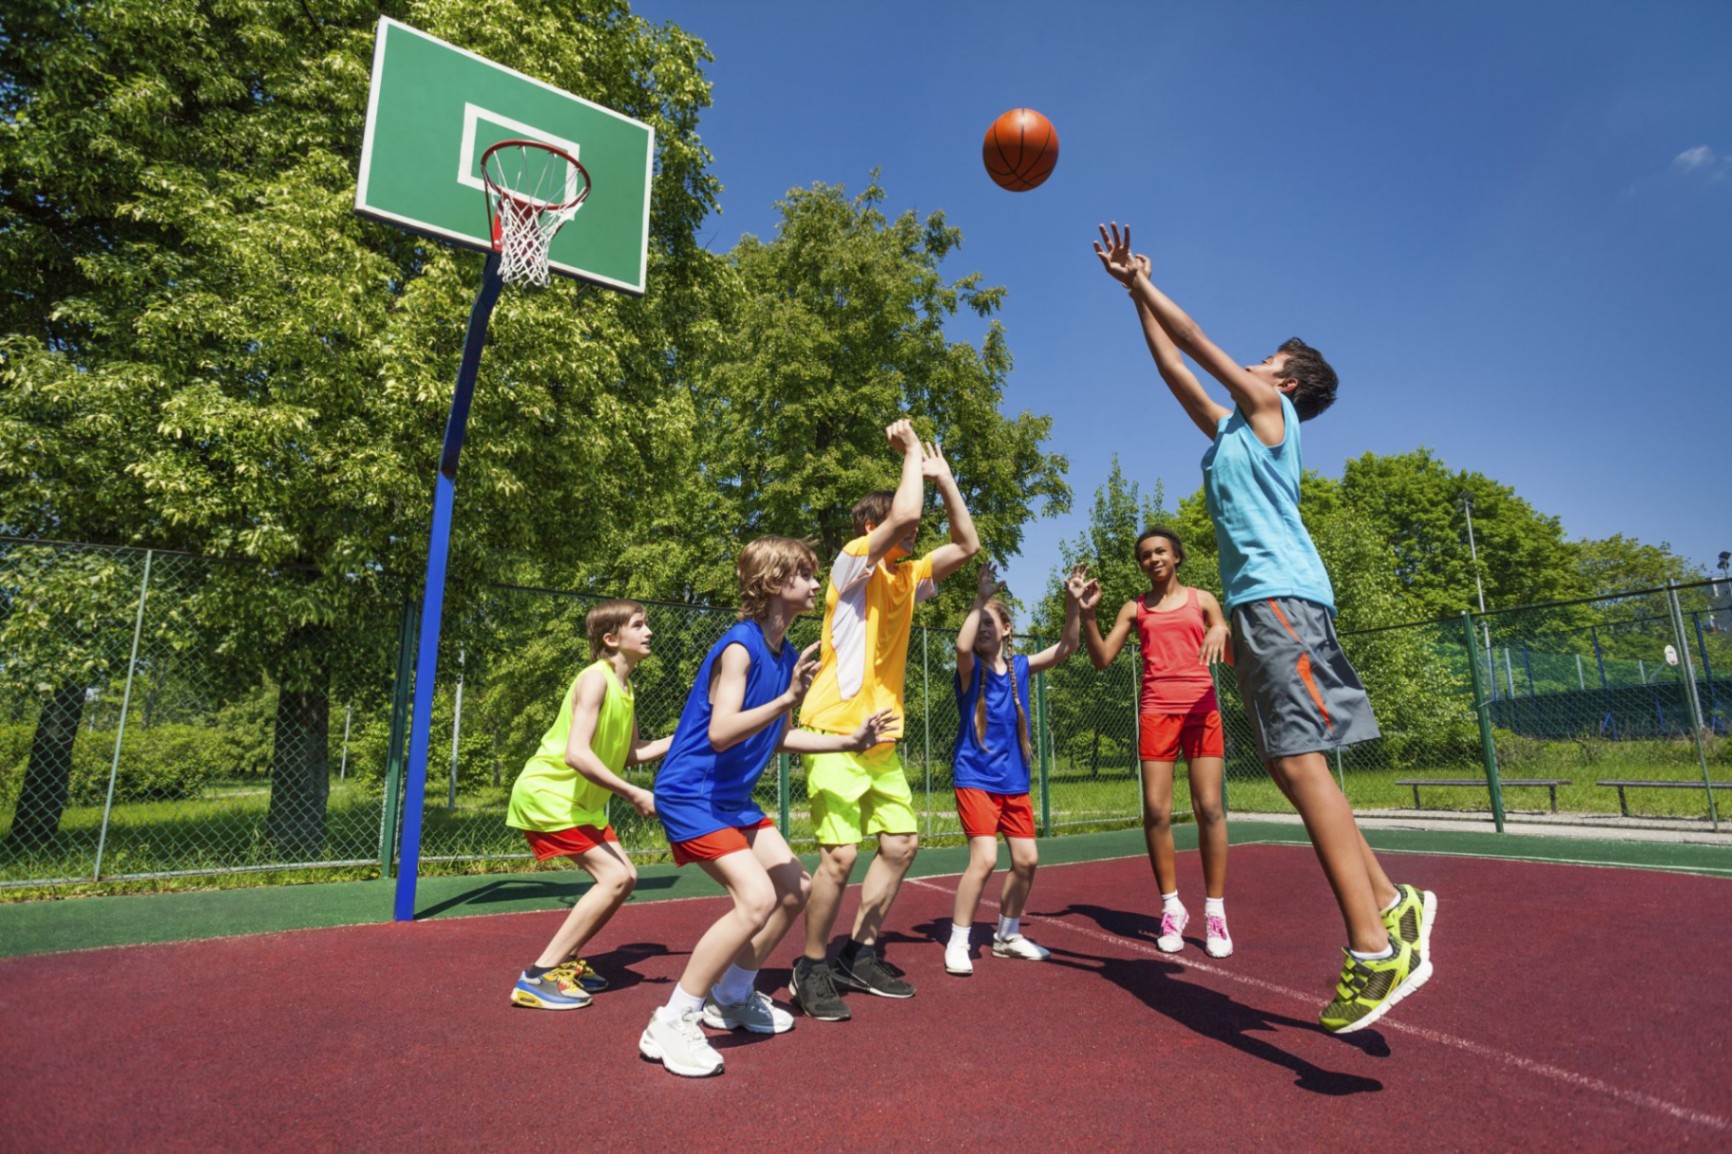 Should Children Try Sports? Check Out the Best to Get Started